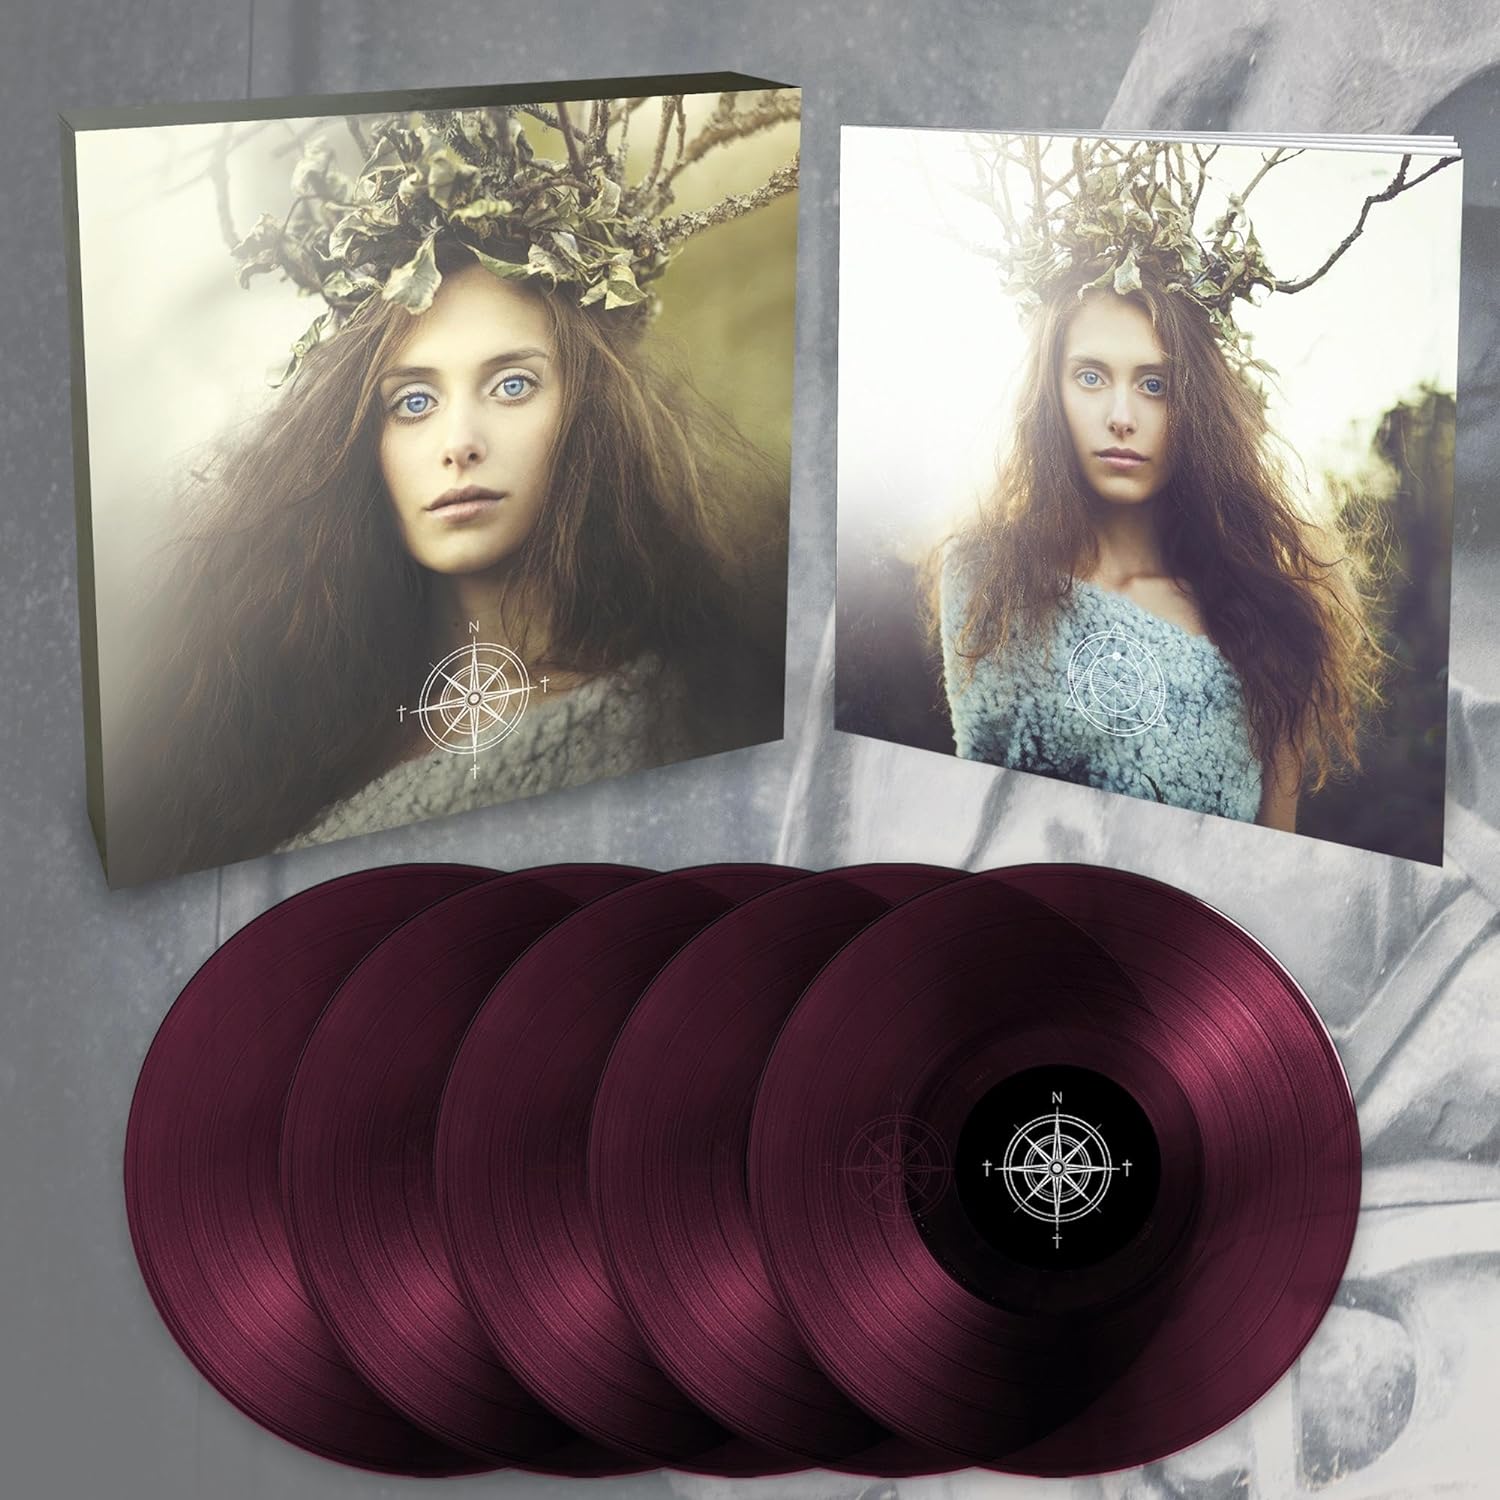 Swallow The Sun "Songs From The North I, II & III" 5x12" Violet Vinyl - PRE-ORDER